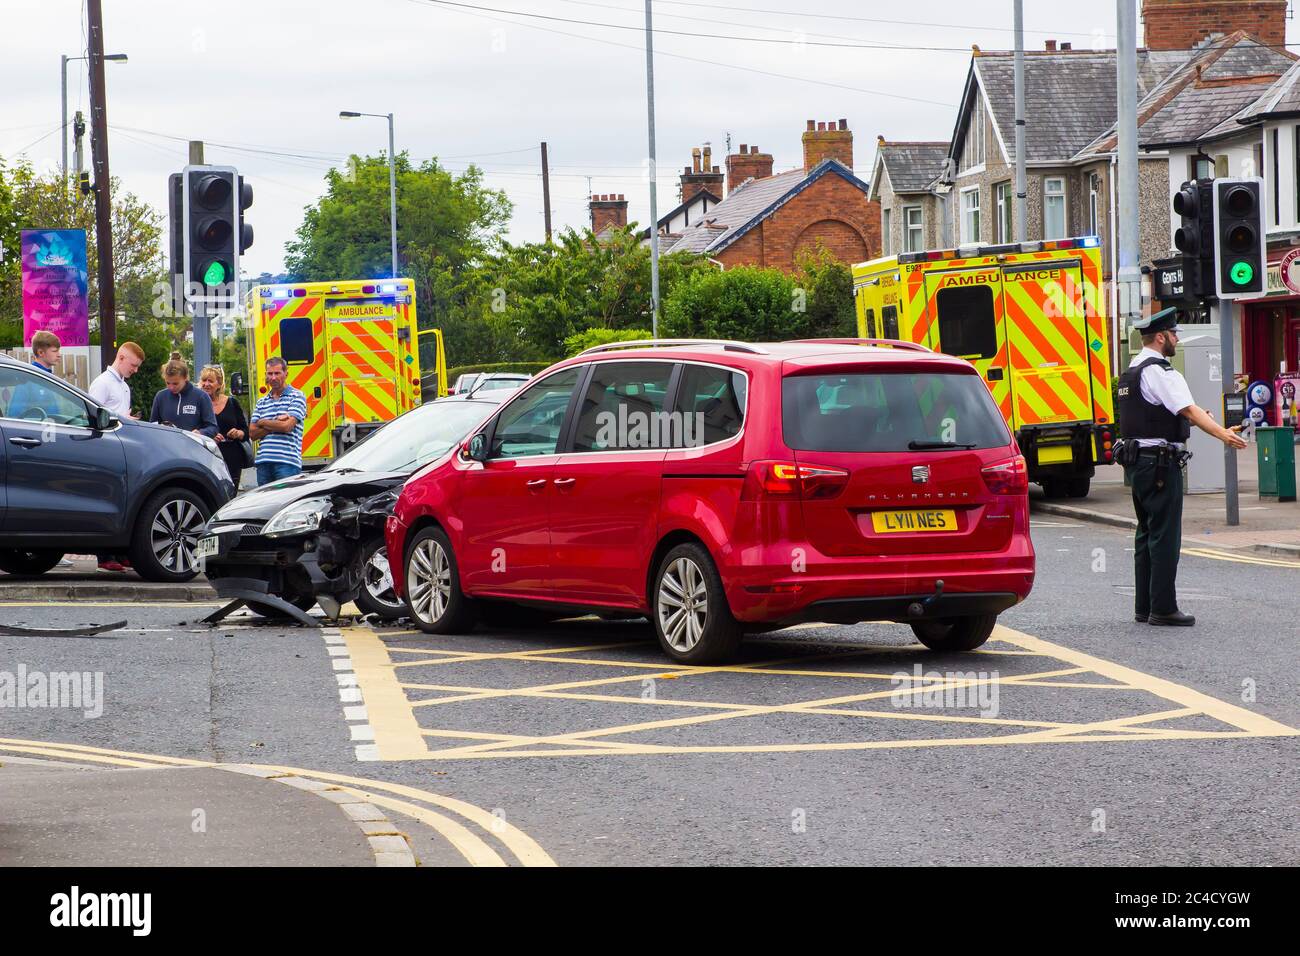 7 December 2018 A multi vehicle road traffic accident at Ballyholme in Bangor County Down Northern Ireland with two ambulances in attendance. details Stock Photo